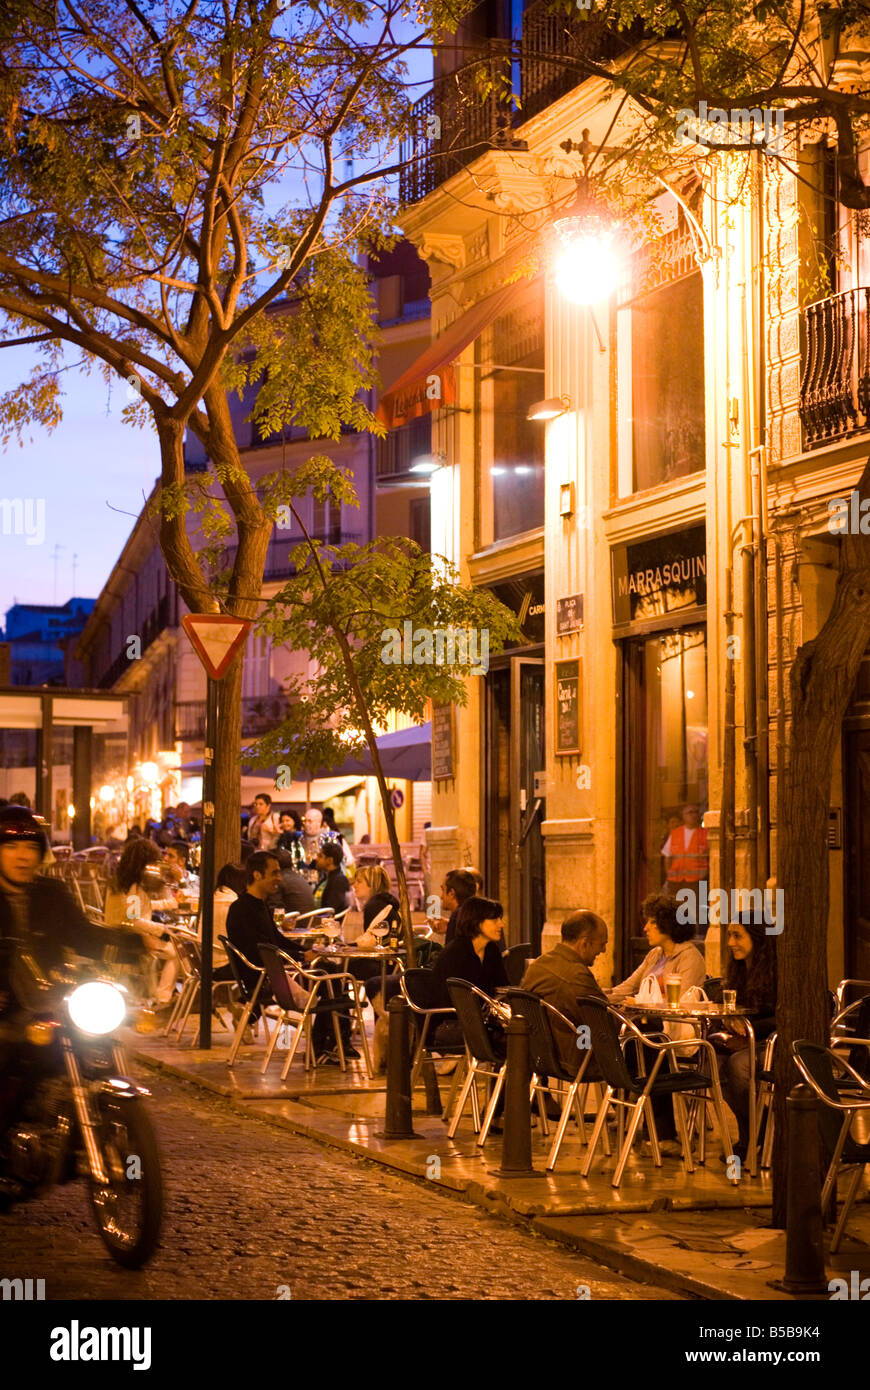 People sitting outside a cafe bar on Plaza Tossal in the historic El Carmen city centre of Valencia Spain Stock Photo